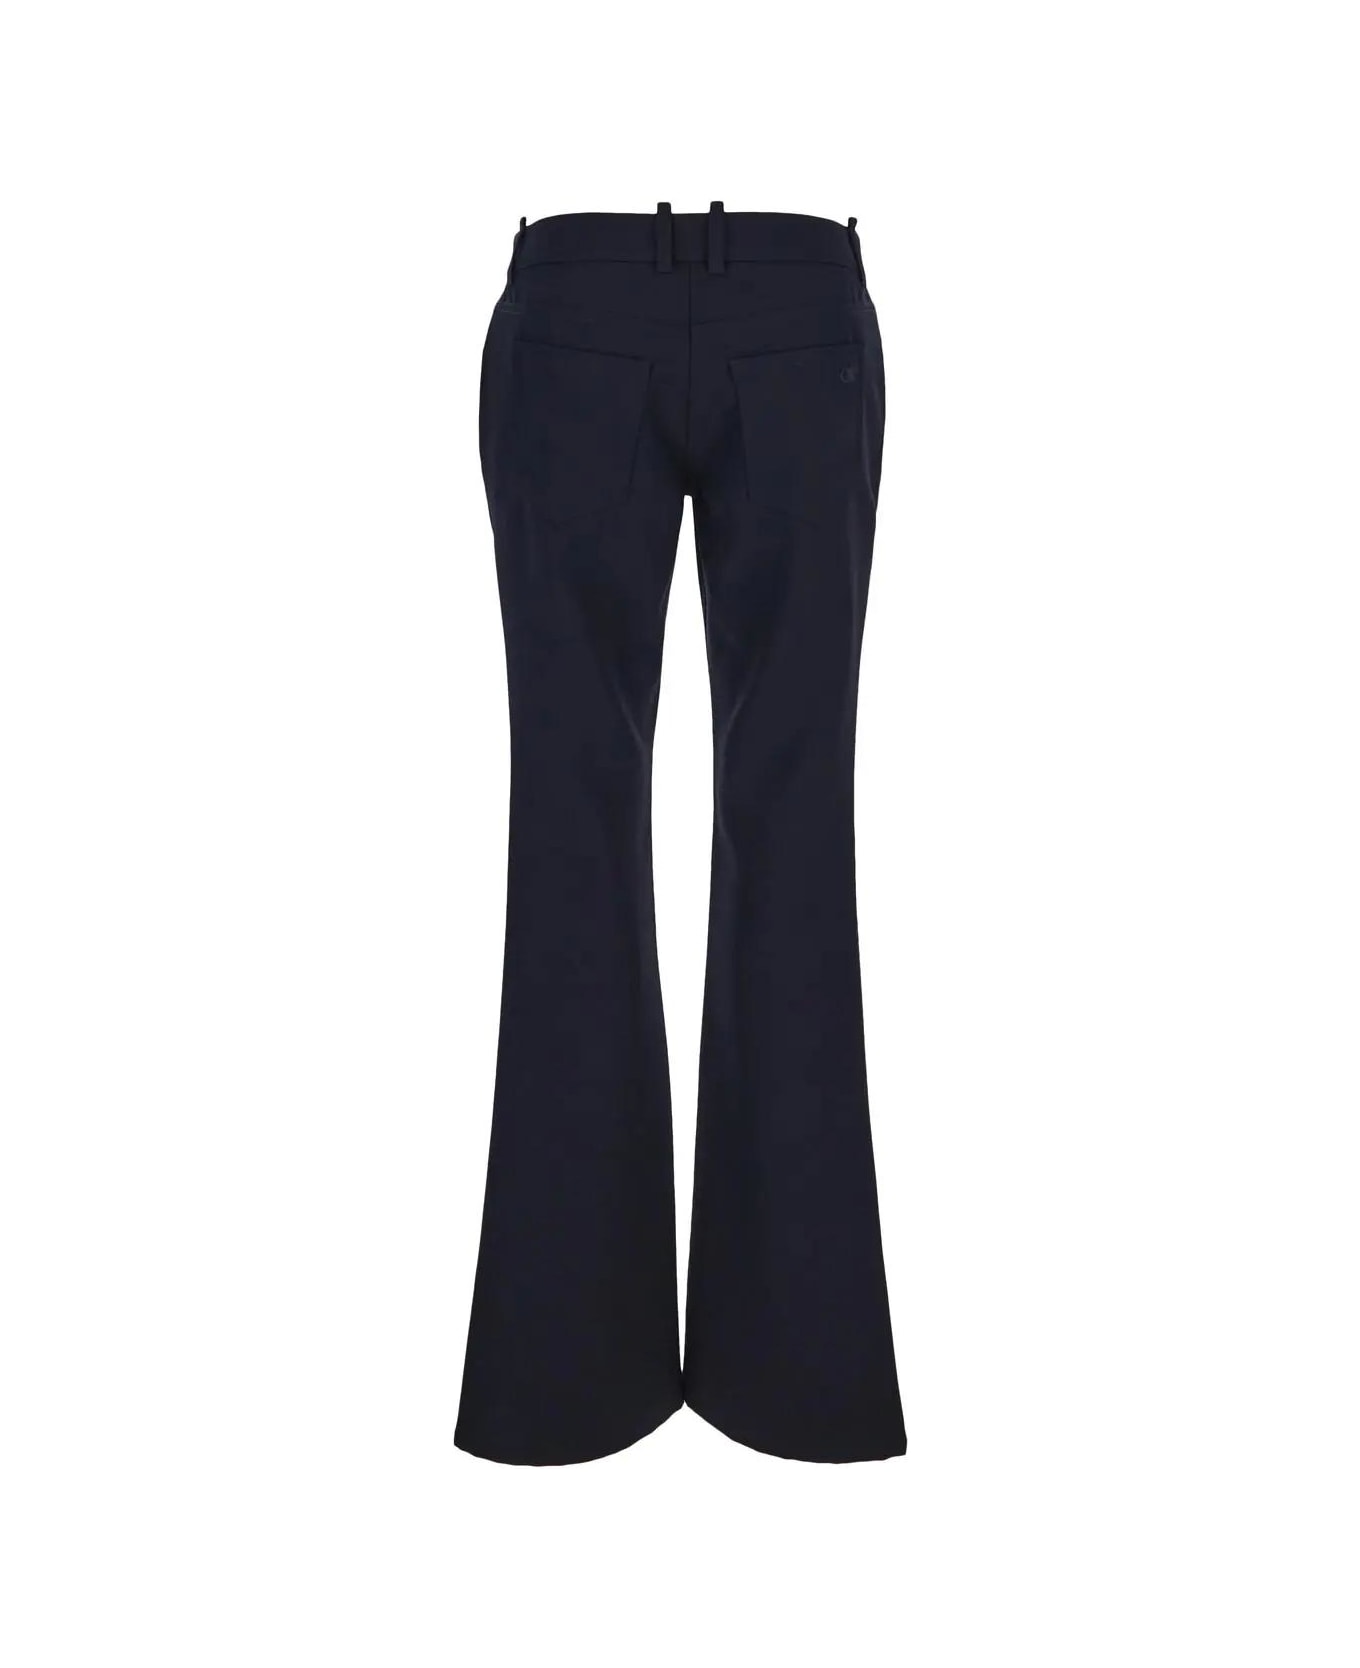 Off-White Dry Wool Slim Flared Trousers - Cobalt Blue ボトムス